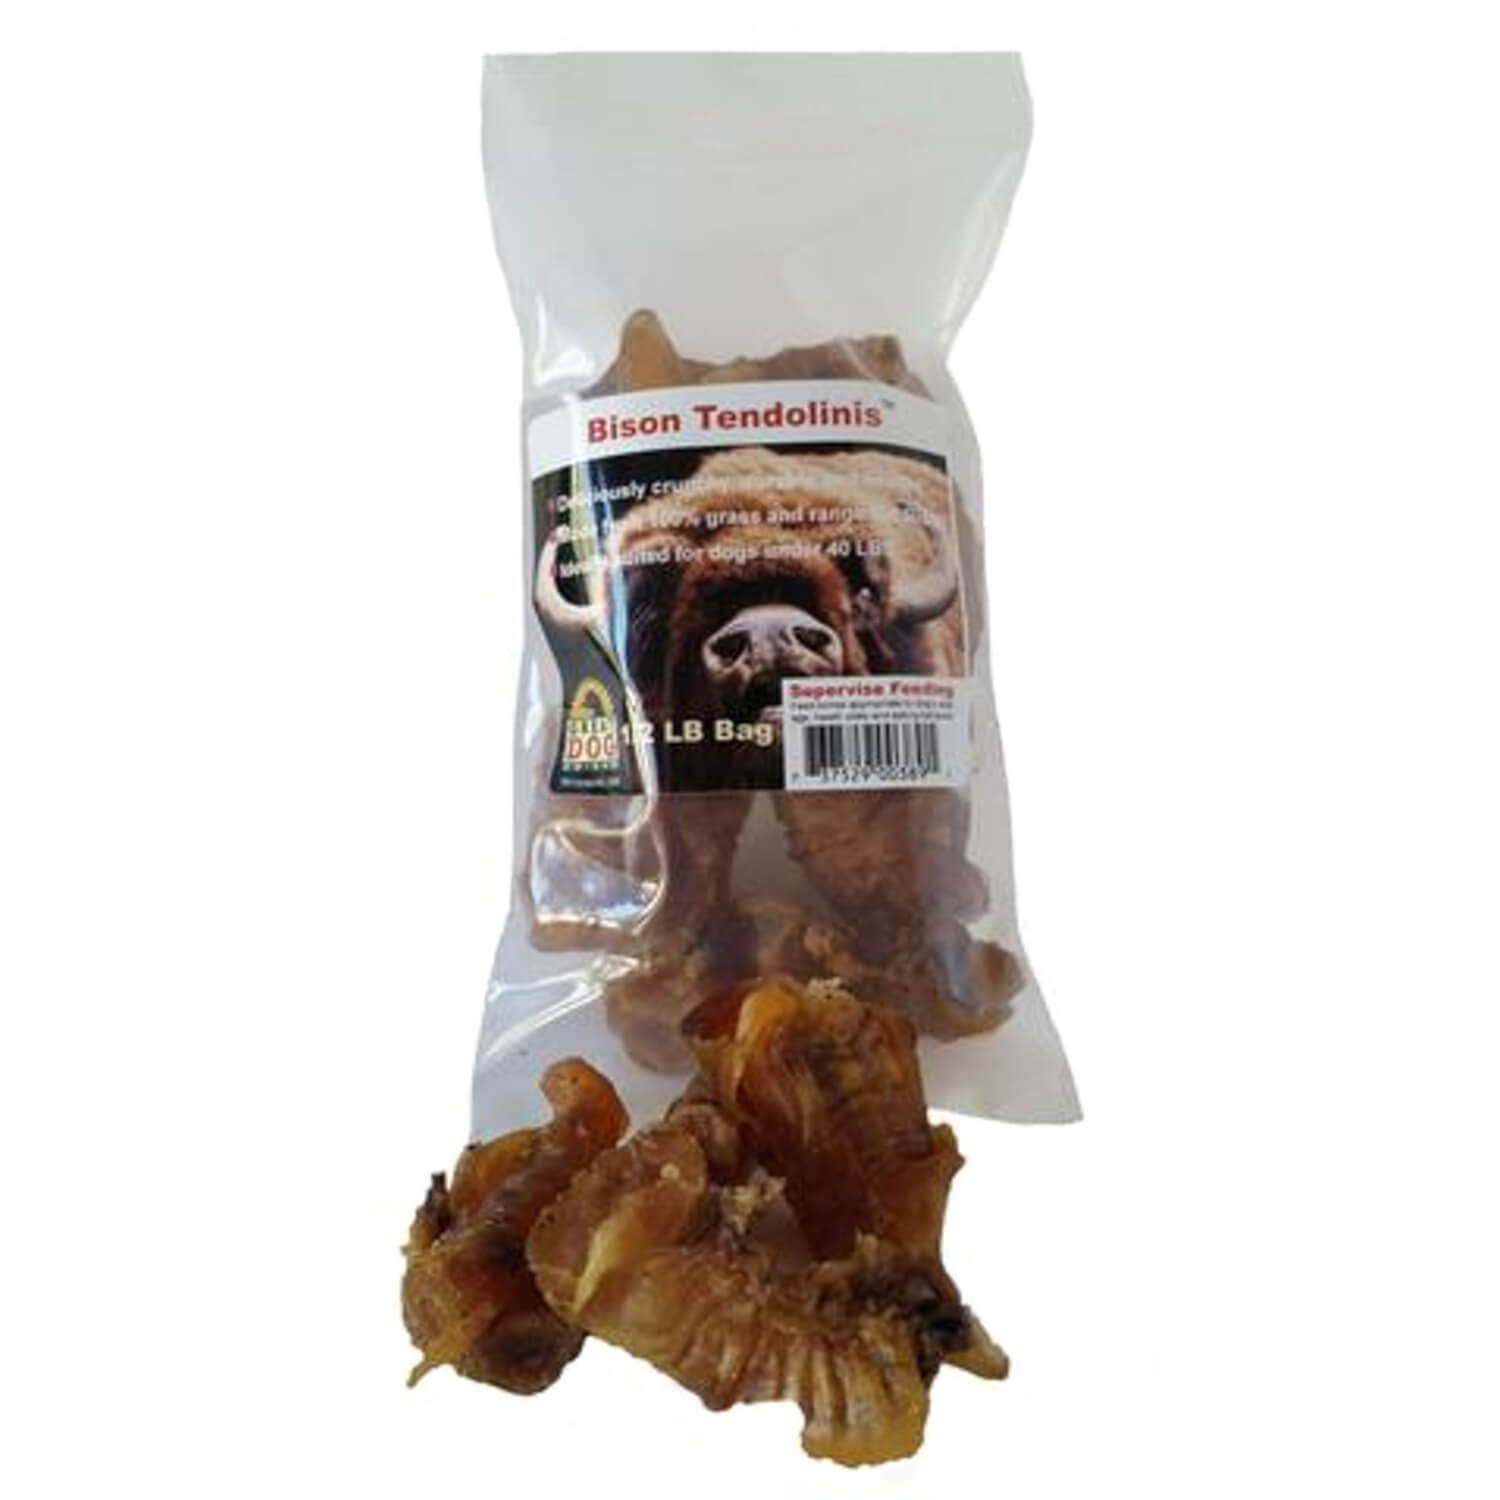 GREAT DOG Bison Tendolinis (Bison Tendons) half pound bag - sourced and made in usa